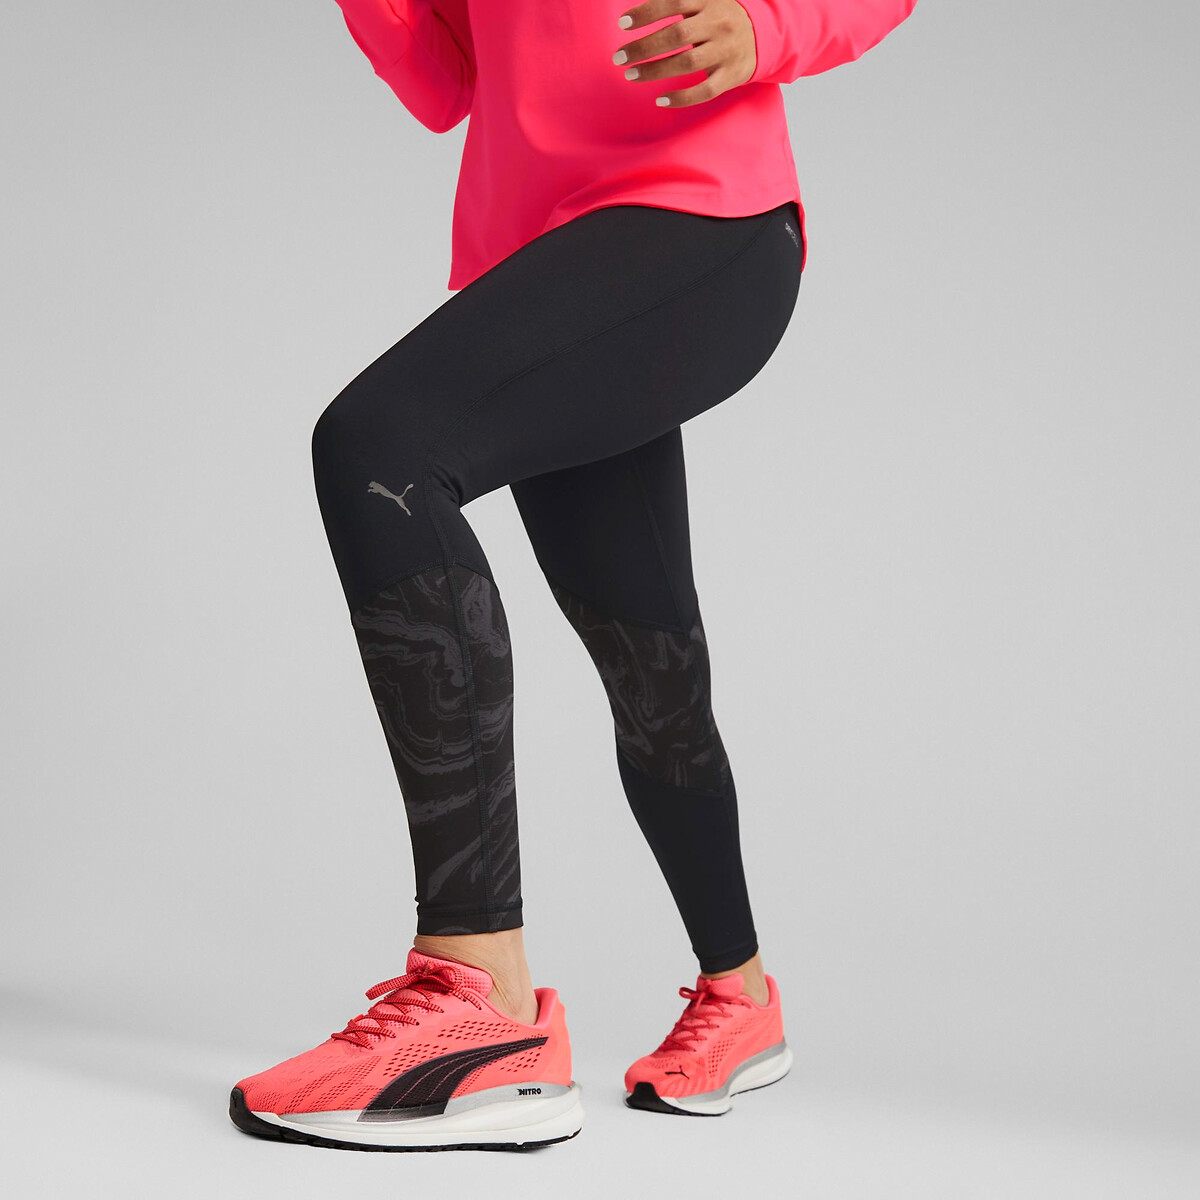 Image of Tight Cropped Running Leggings with Graphic Print and High Waist